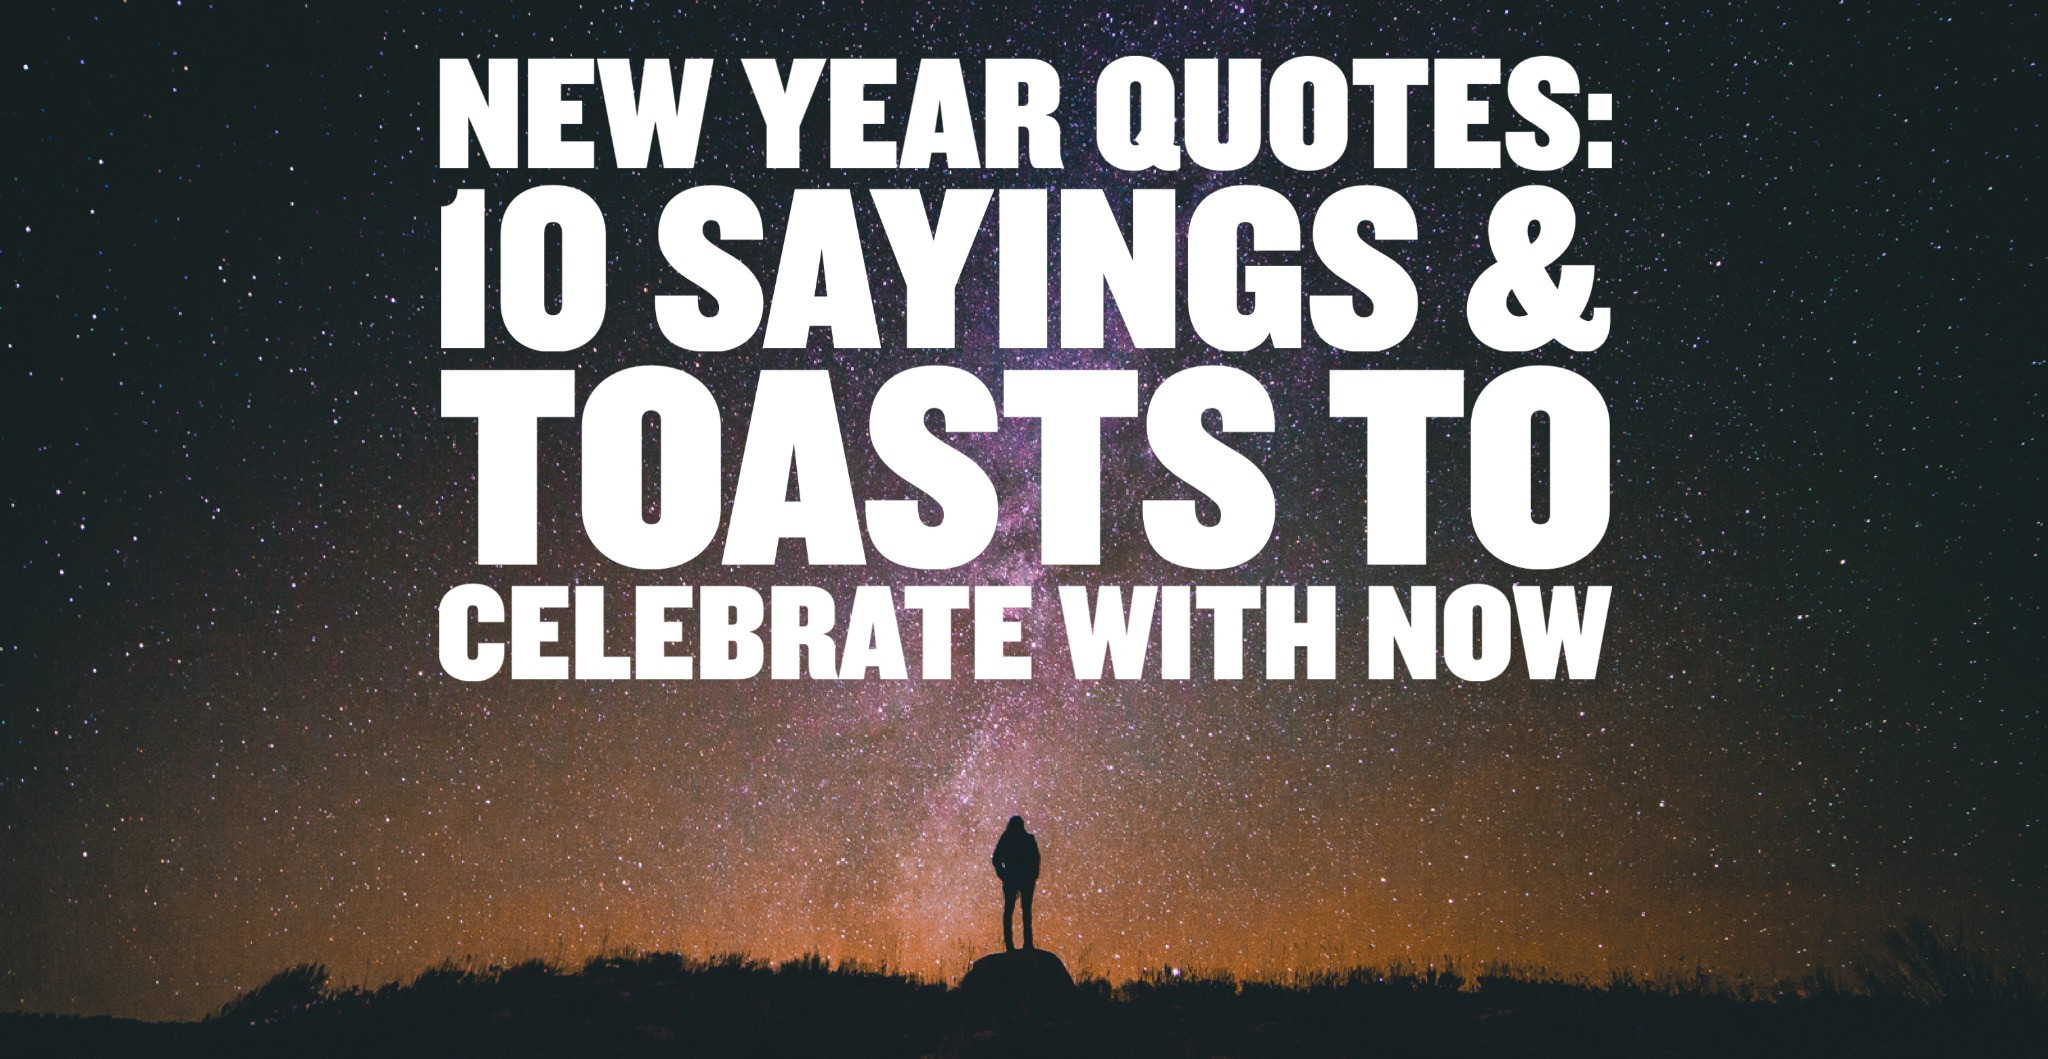 Quotes About A New Year
 New Year Quotes 10 Sayings & Toasts To Celebrate With